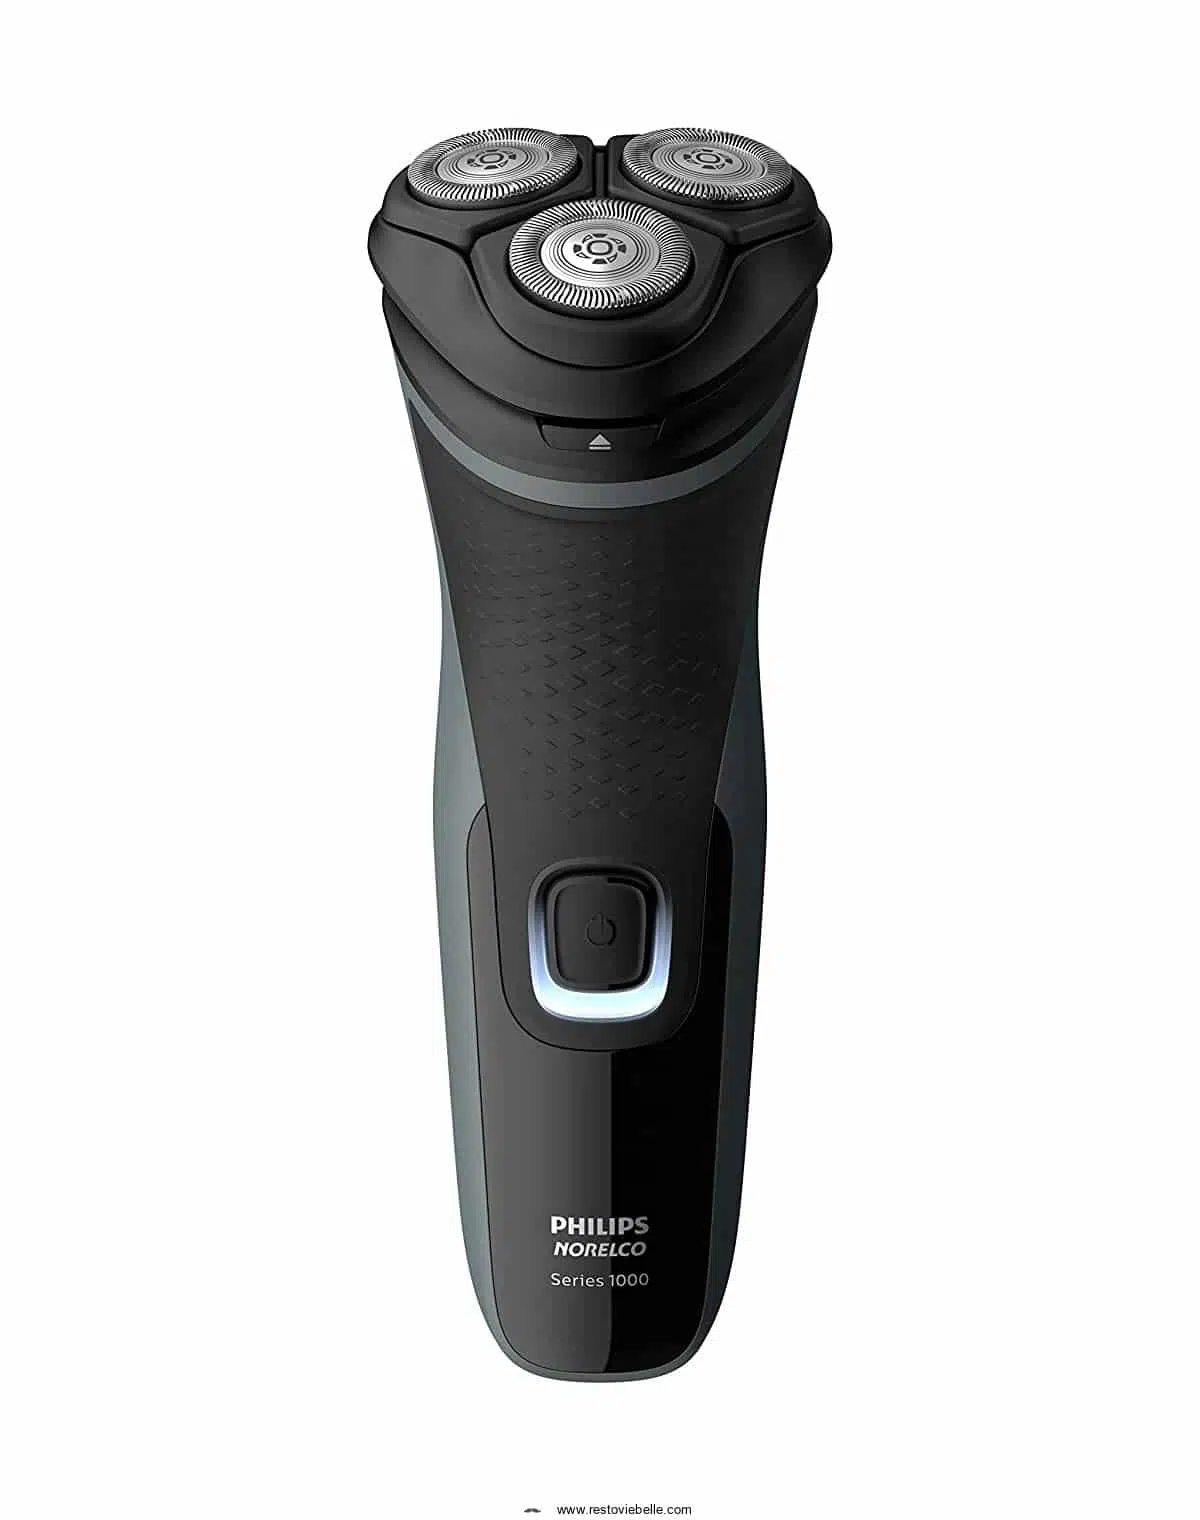 Philips Norelco Shaver 2300 Rechargeable